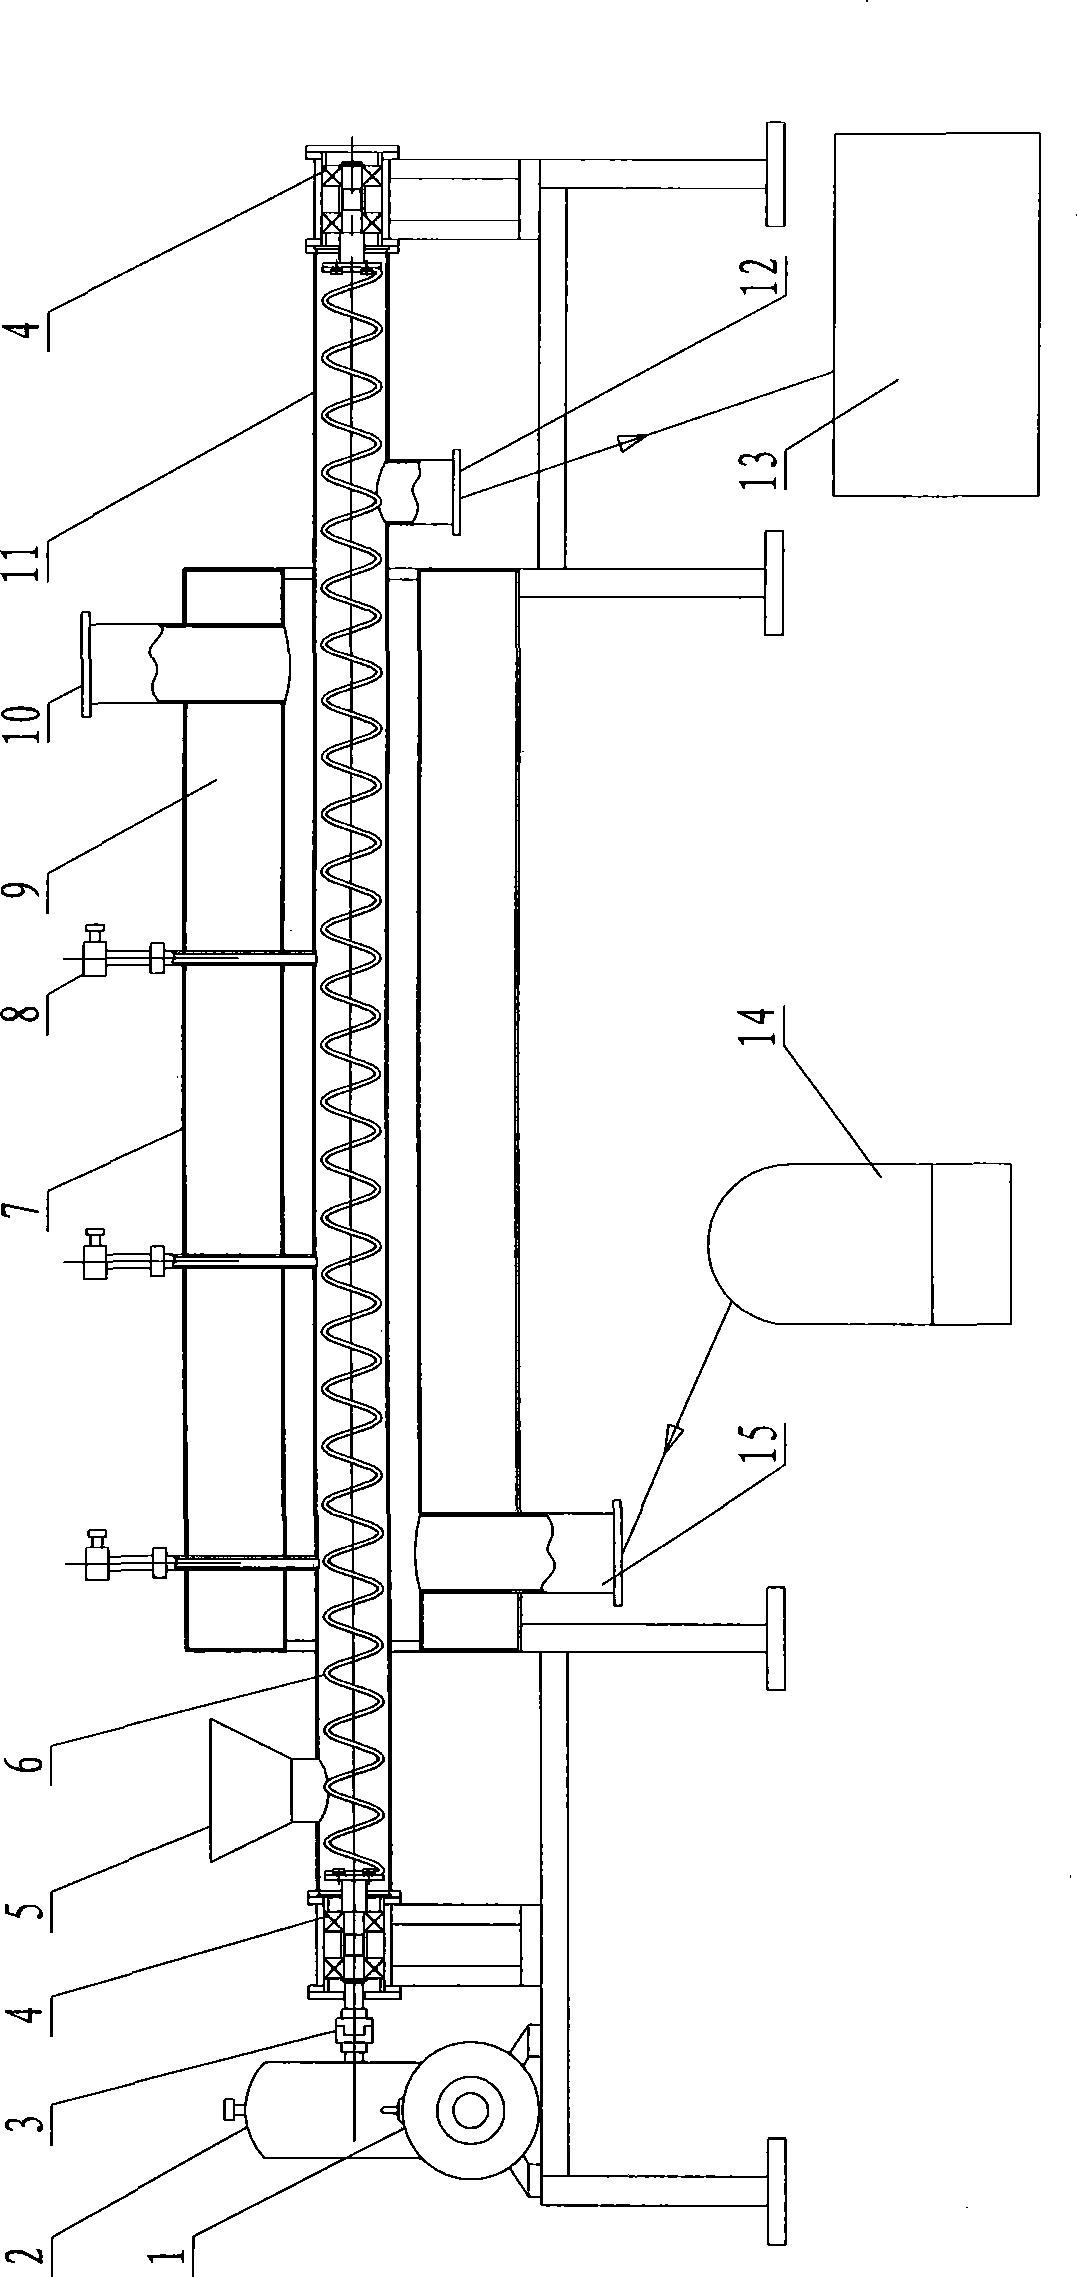 Biomass continuous pyrolysis charing apparatus with flexible spiral conveying apparatus